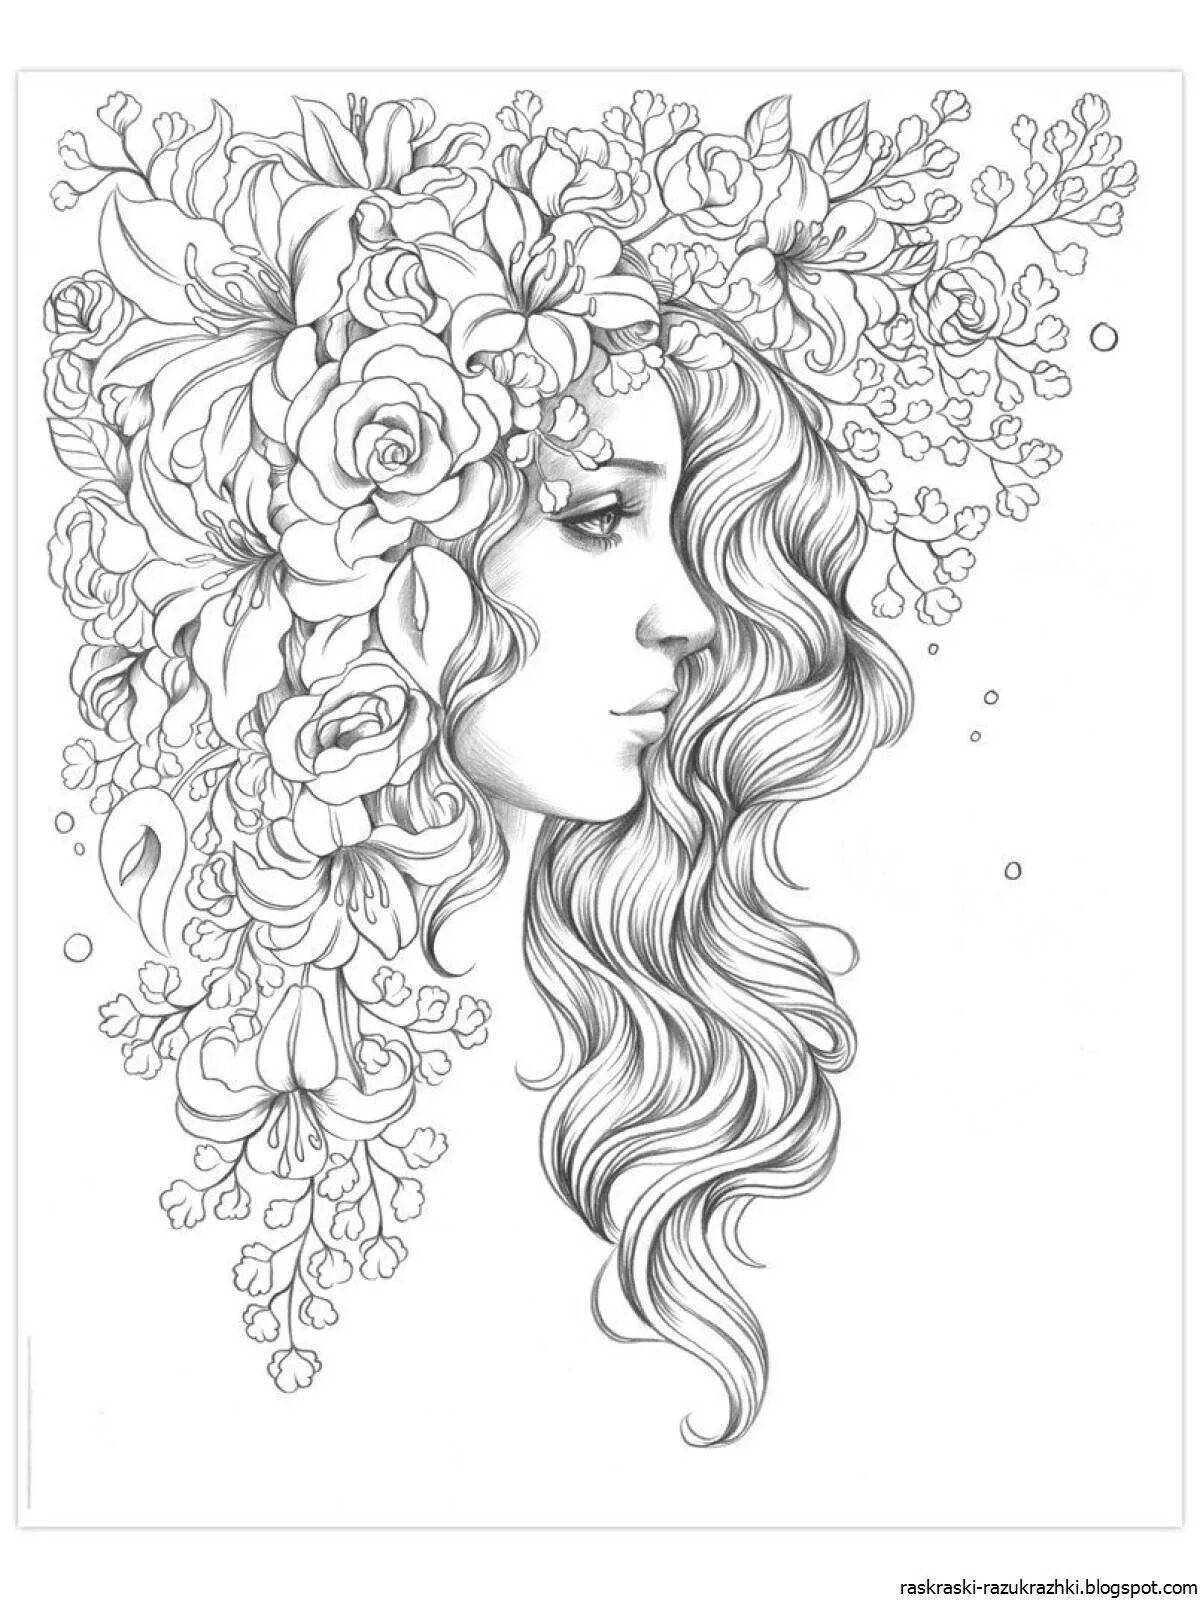 Majestic coloring book, beautiful for all adults